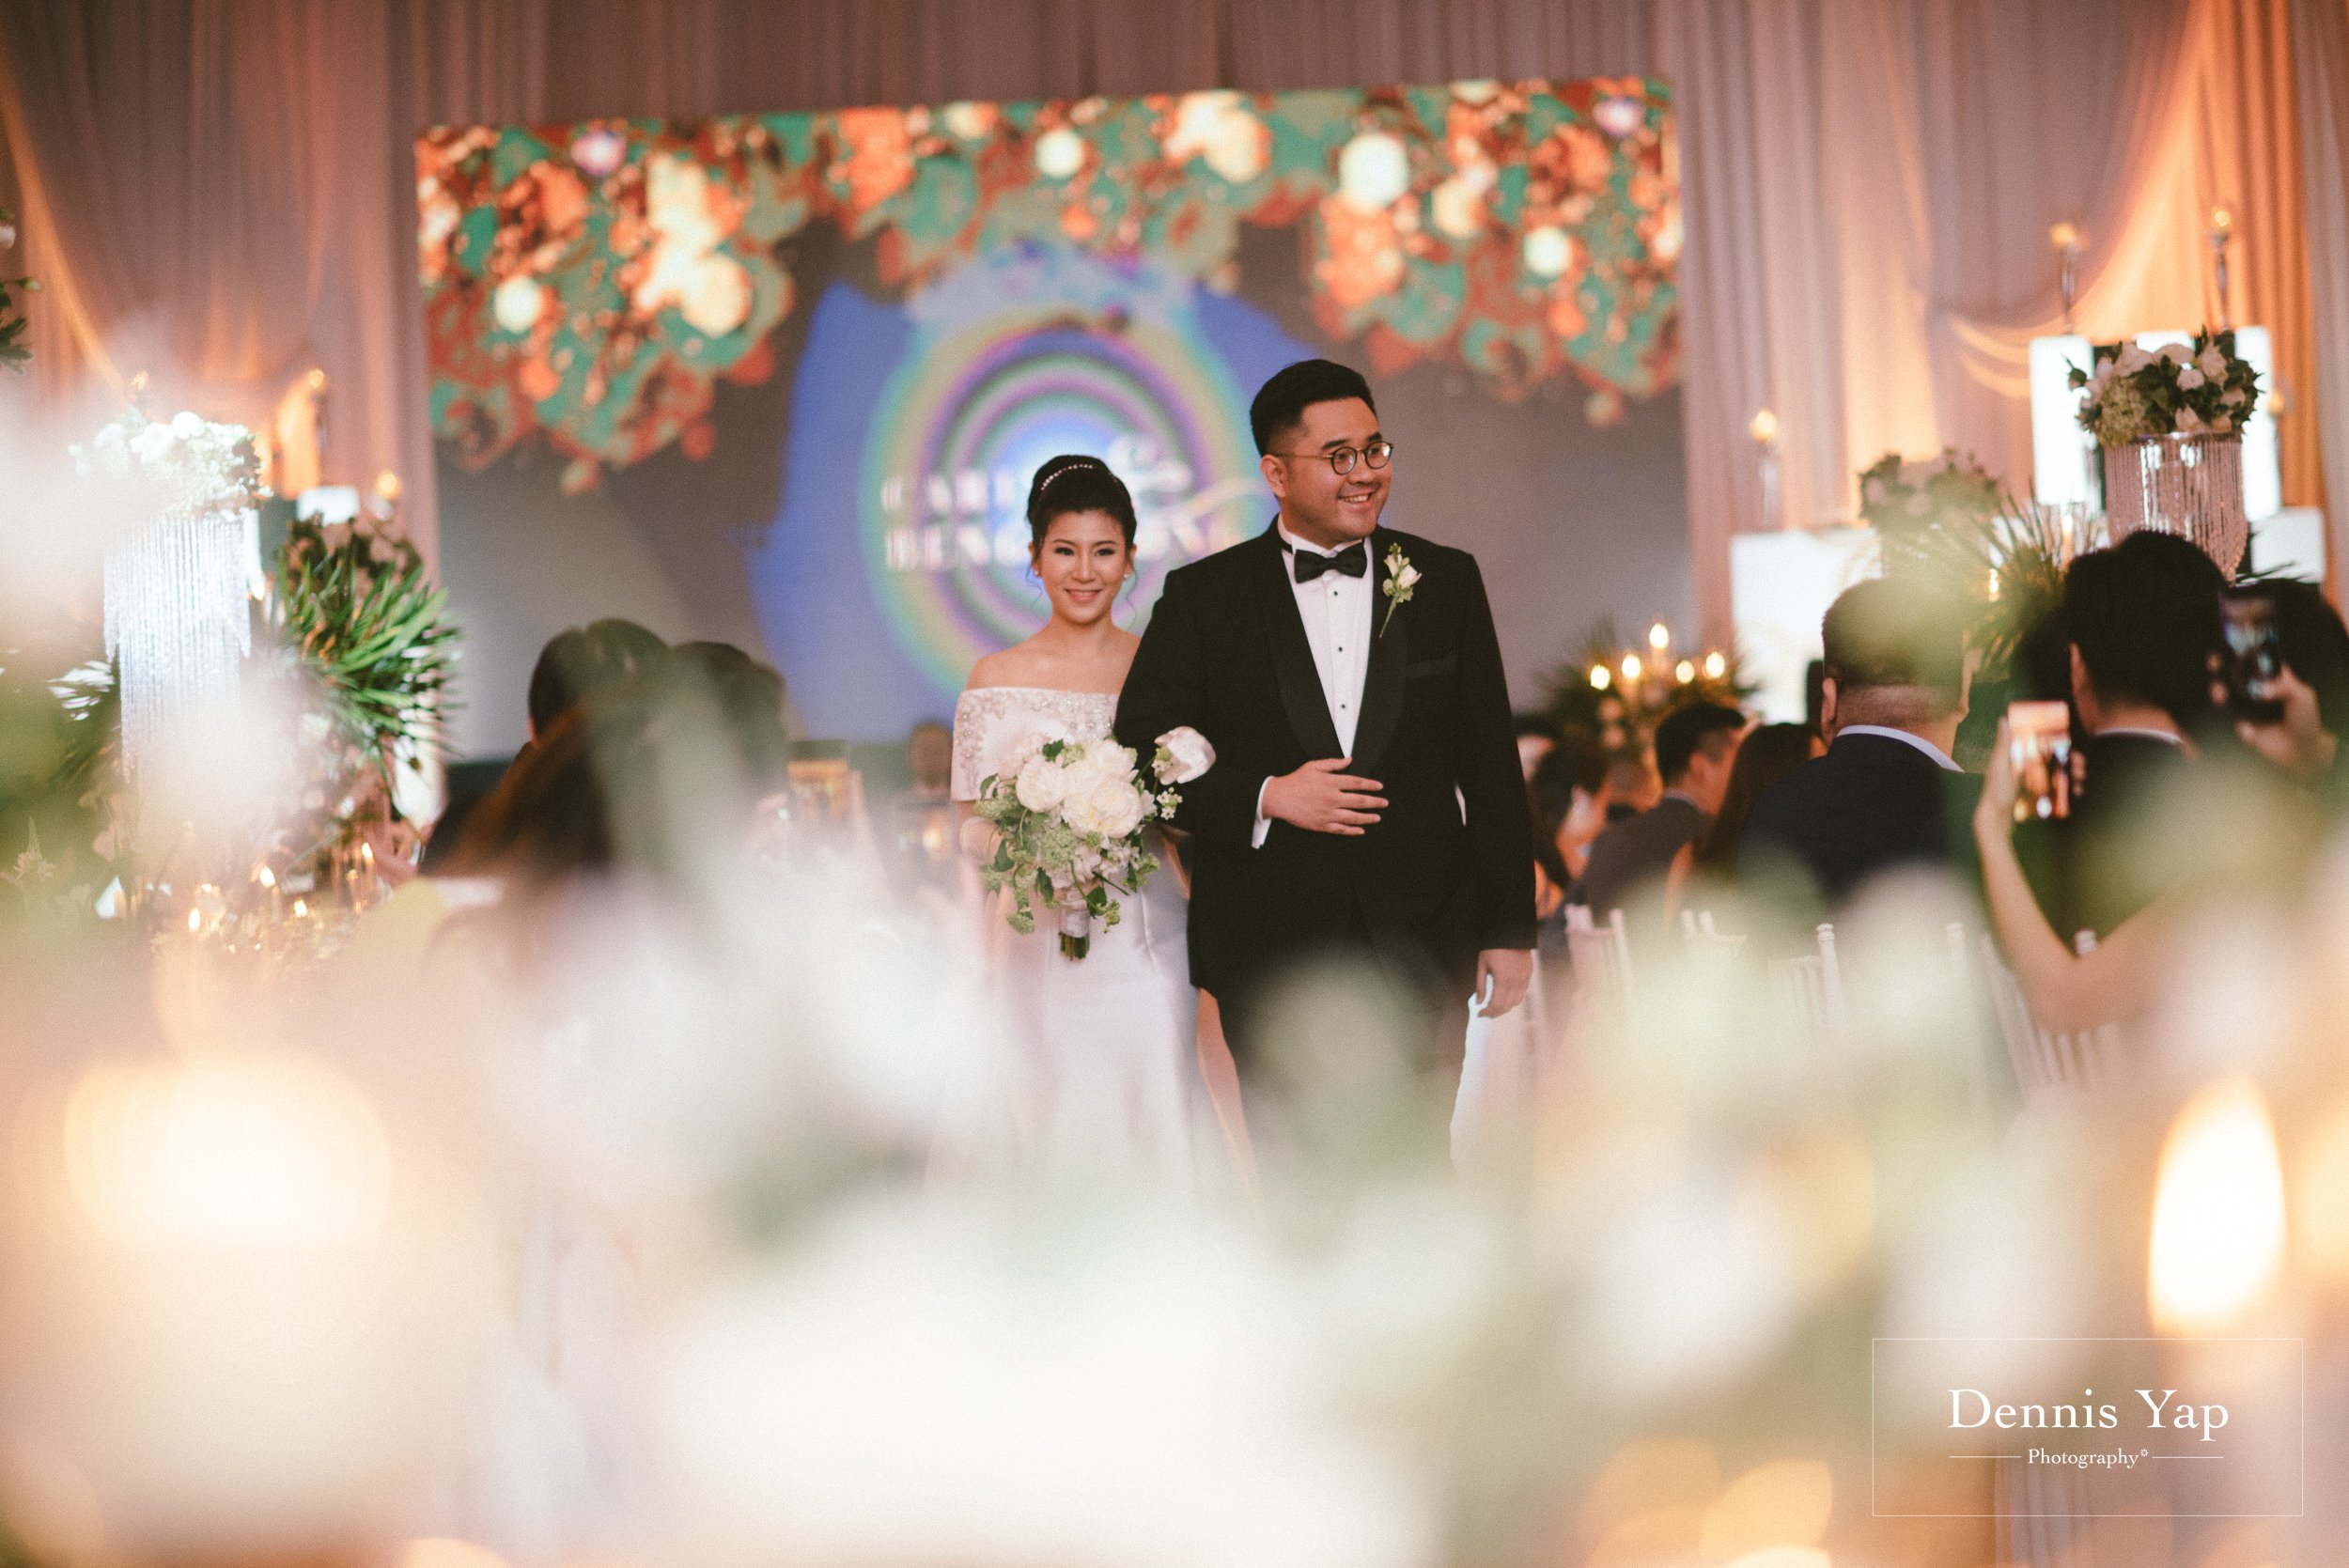 beng seong caring E and O hotel the occasion wedding planner awesome decoration dennis yap photography malaysia top wedding photographer-10.jpg